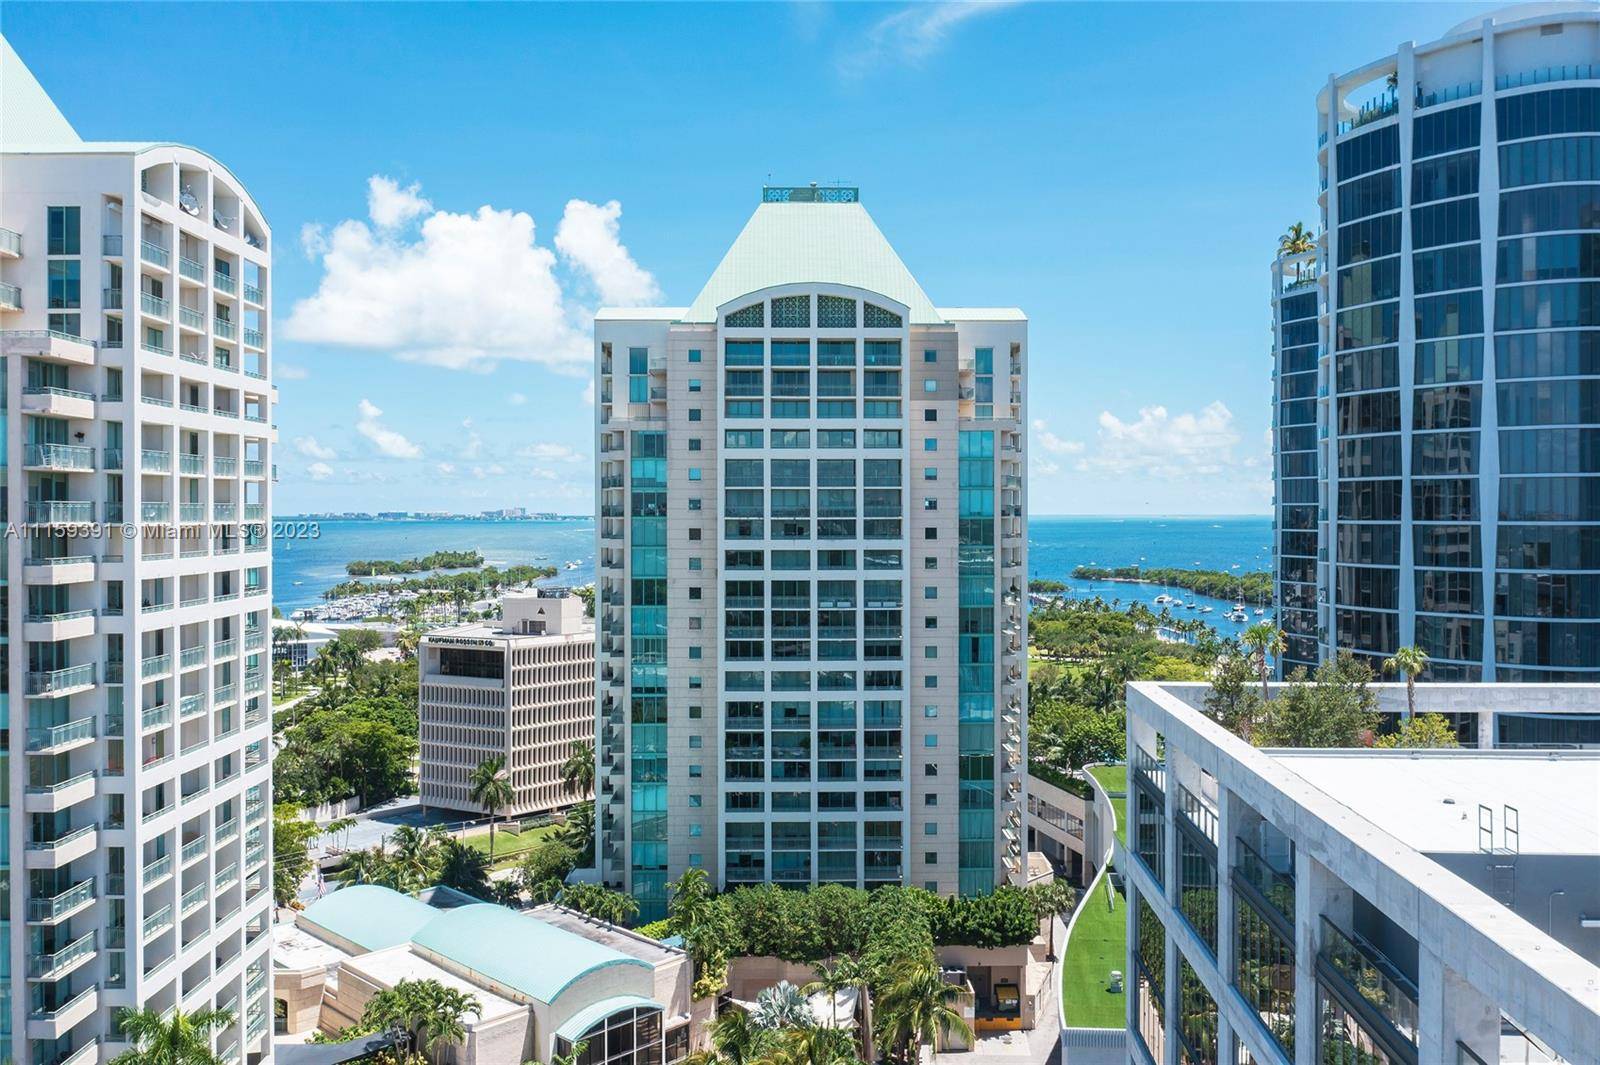 Fully furnished and equipped rental at the exclusive Ritz Carlton on Biscayne Bay in Coconut Grove.